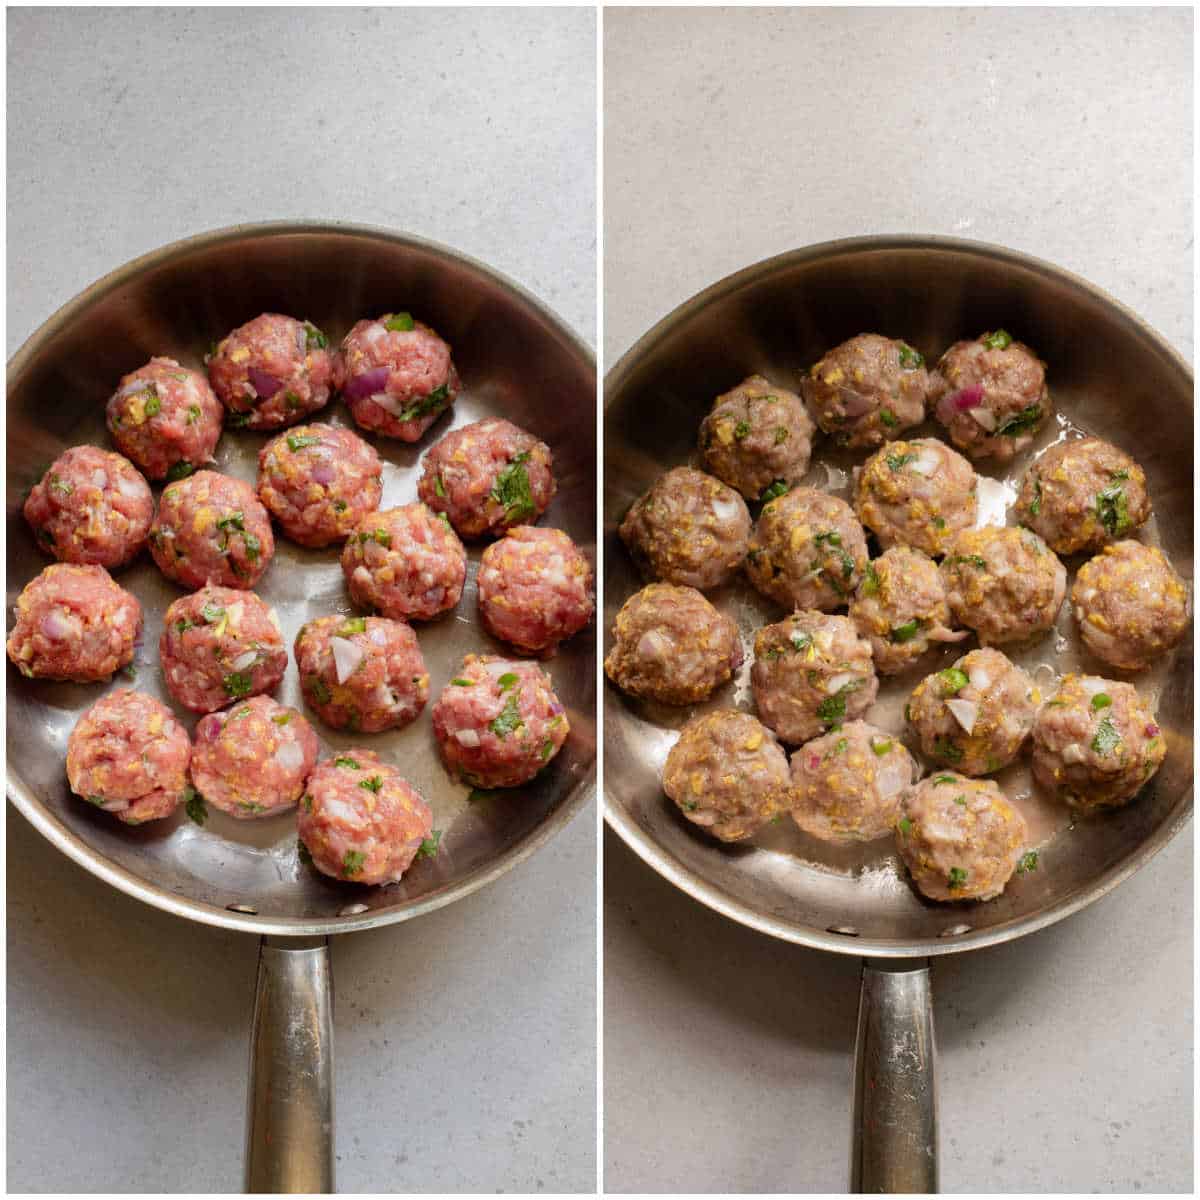 Steps to make Baked Mexican Meatballs.